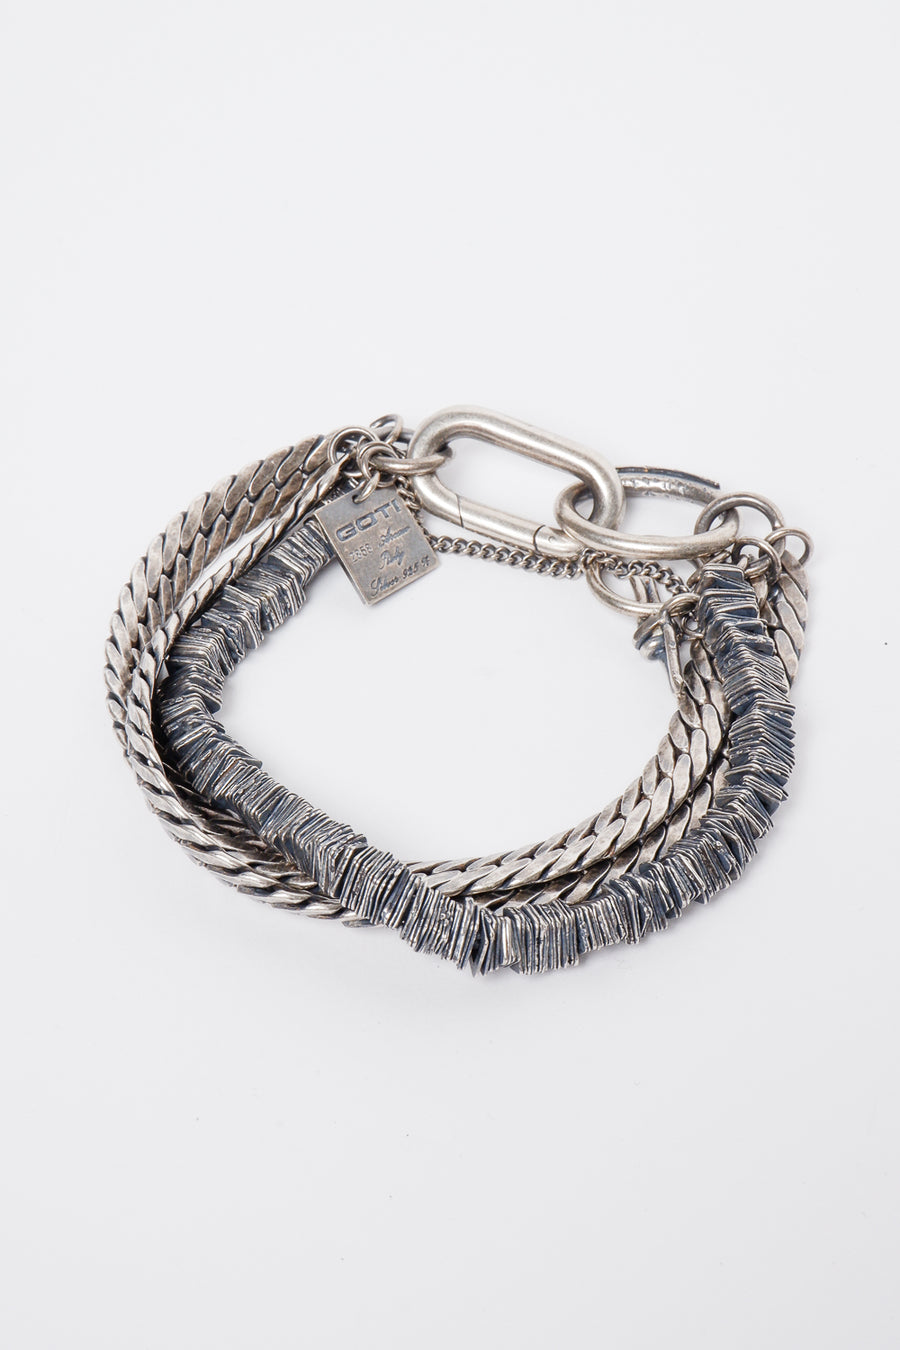 Buy the BR1151 Bracelet at Intro. Spend £50 for free UK delivery. Official stockists. We ship worldwide.